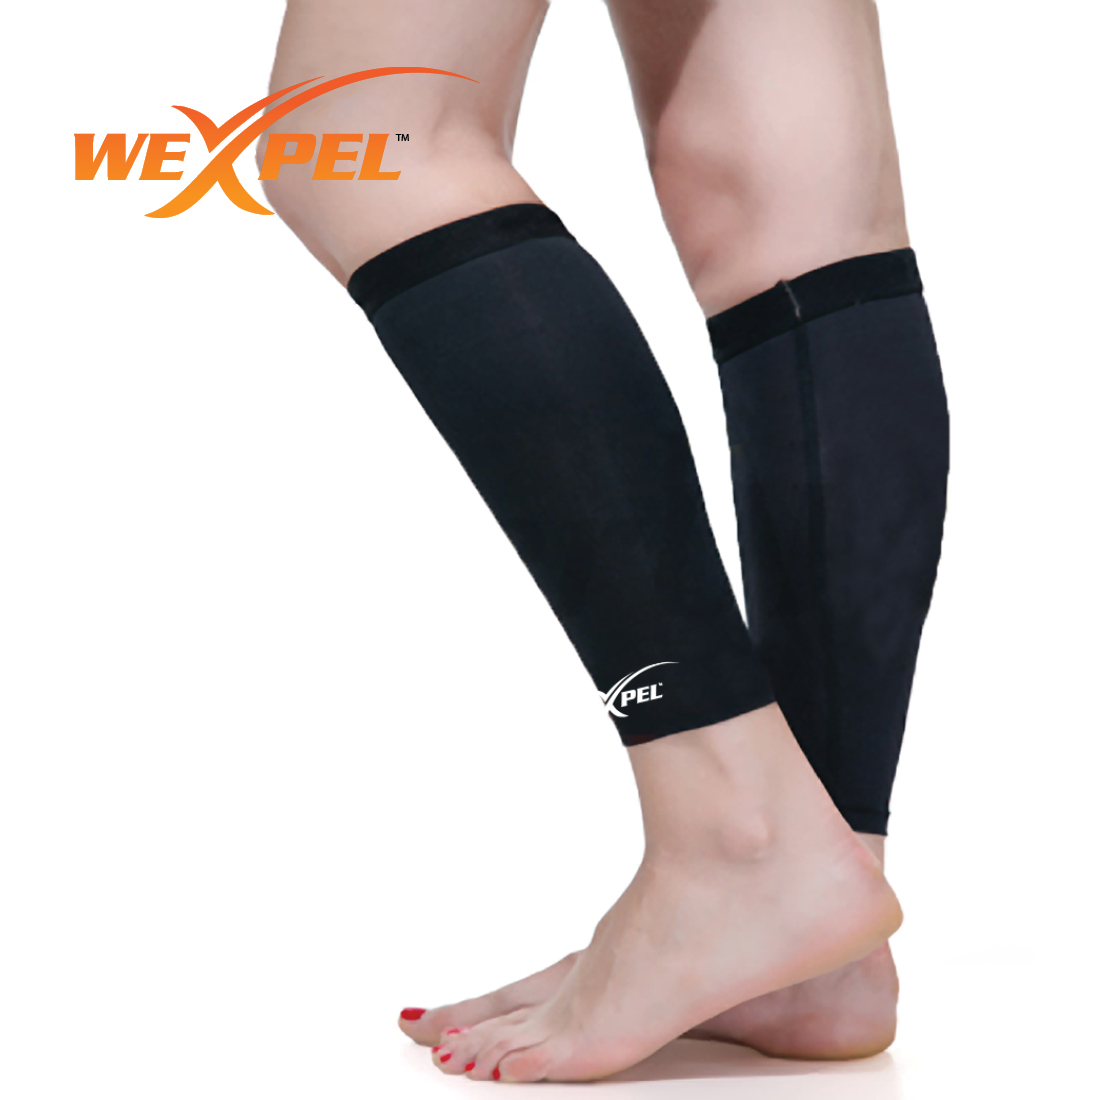 Our Products | Wexpel - Copper Compression Sleeves